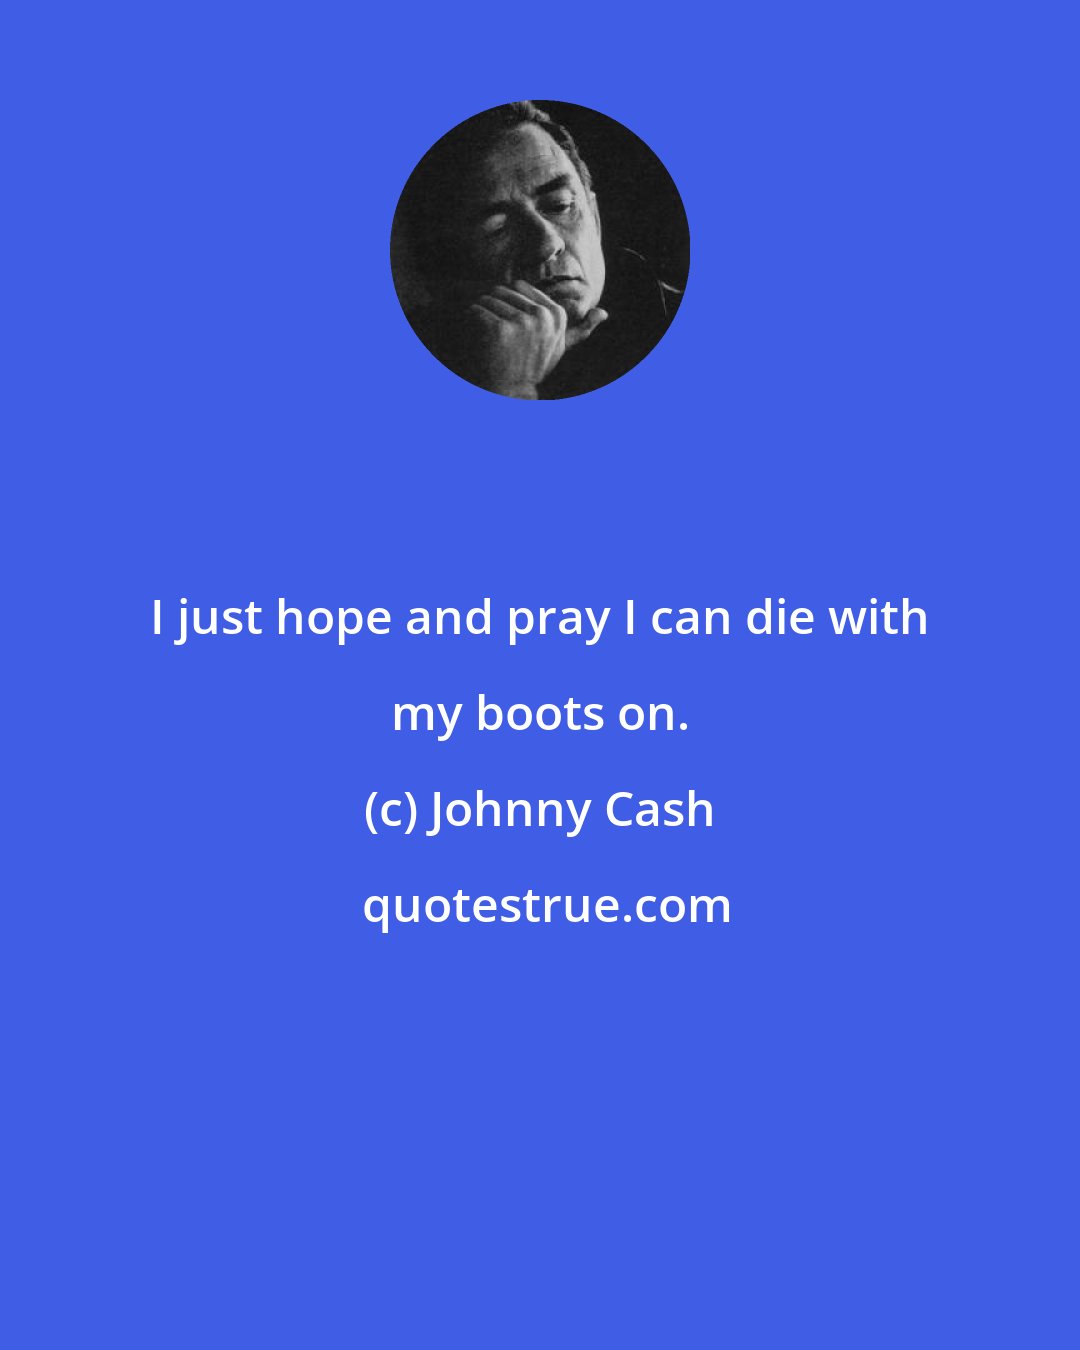 Johnny Cash: I just hope and pray I can die with my boots on.